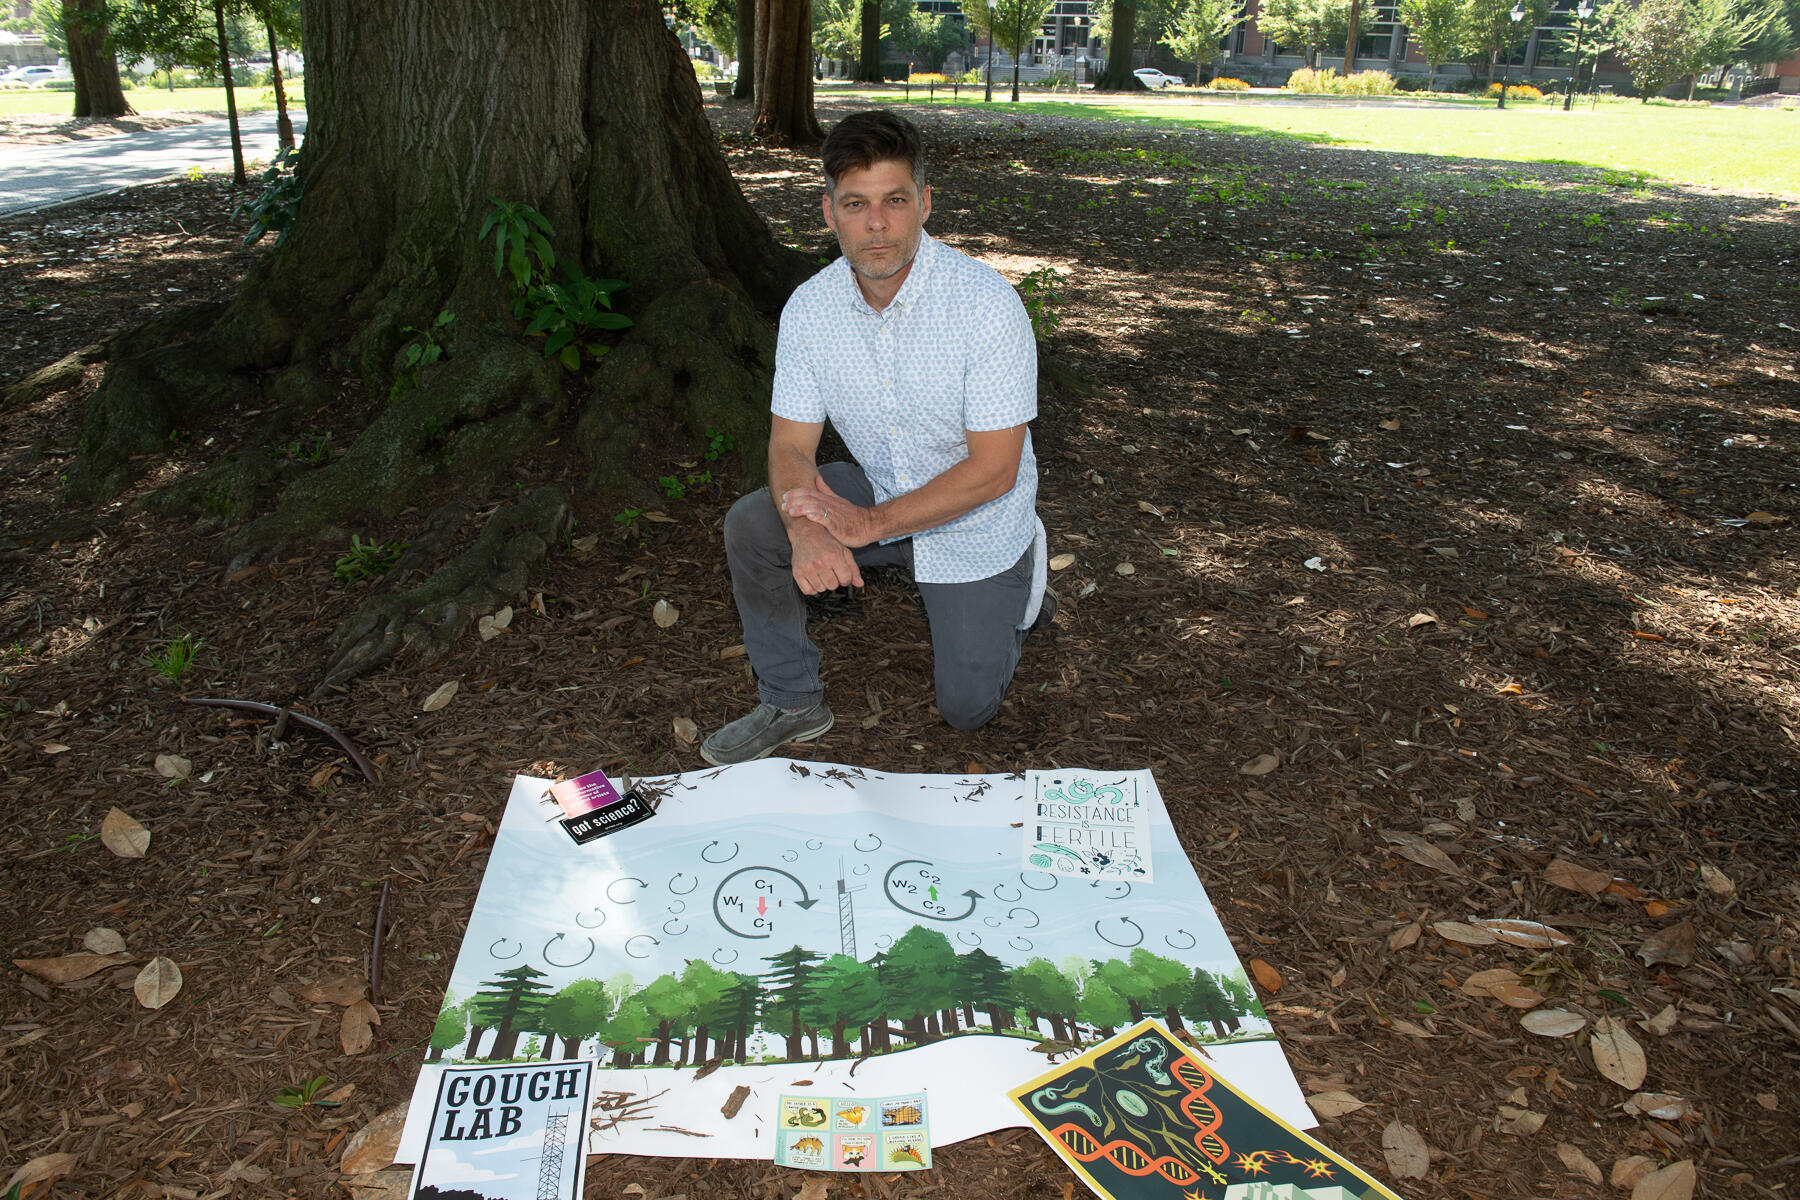 Biology professor Chris Gough, Ph.D., stands in Monroe Park while holding a piece of art produced by one of his students.